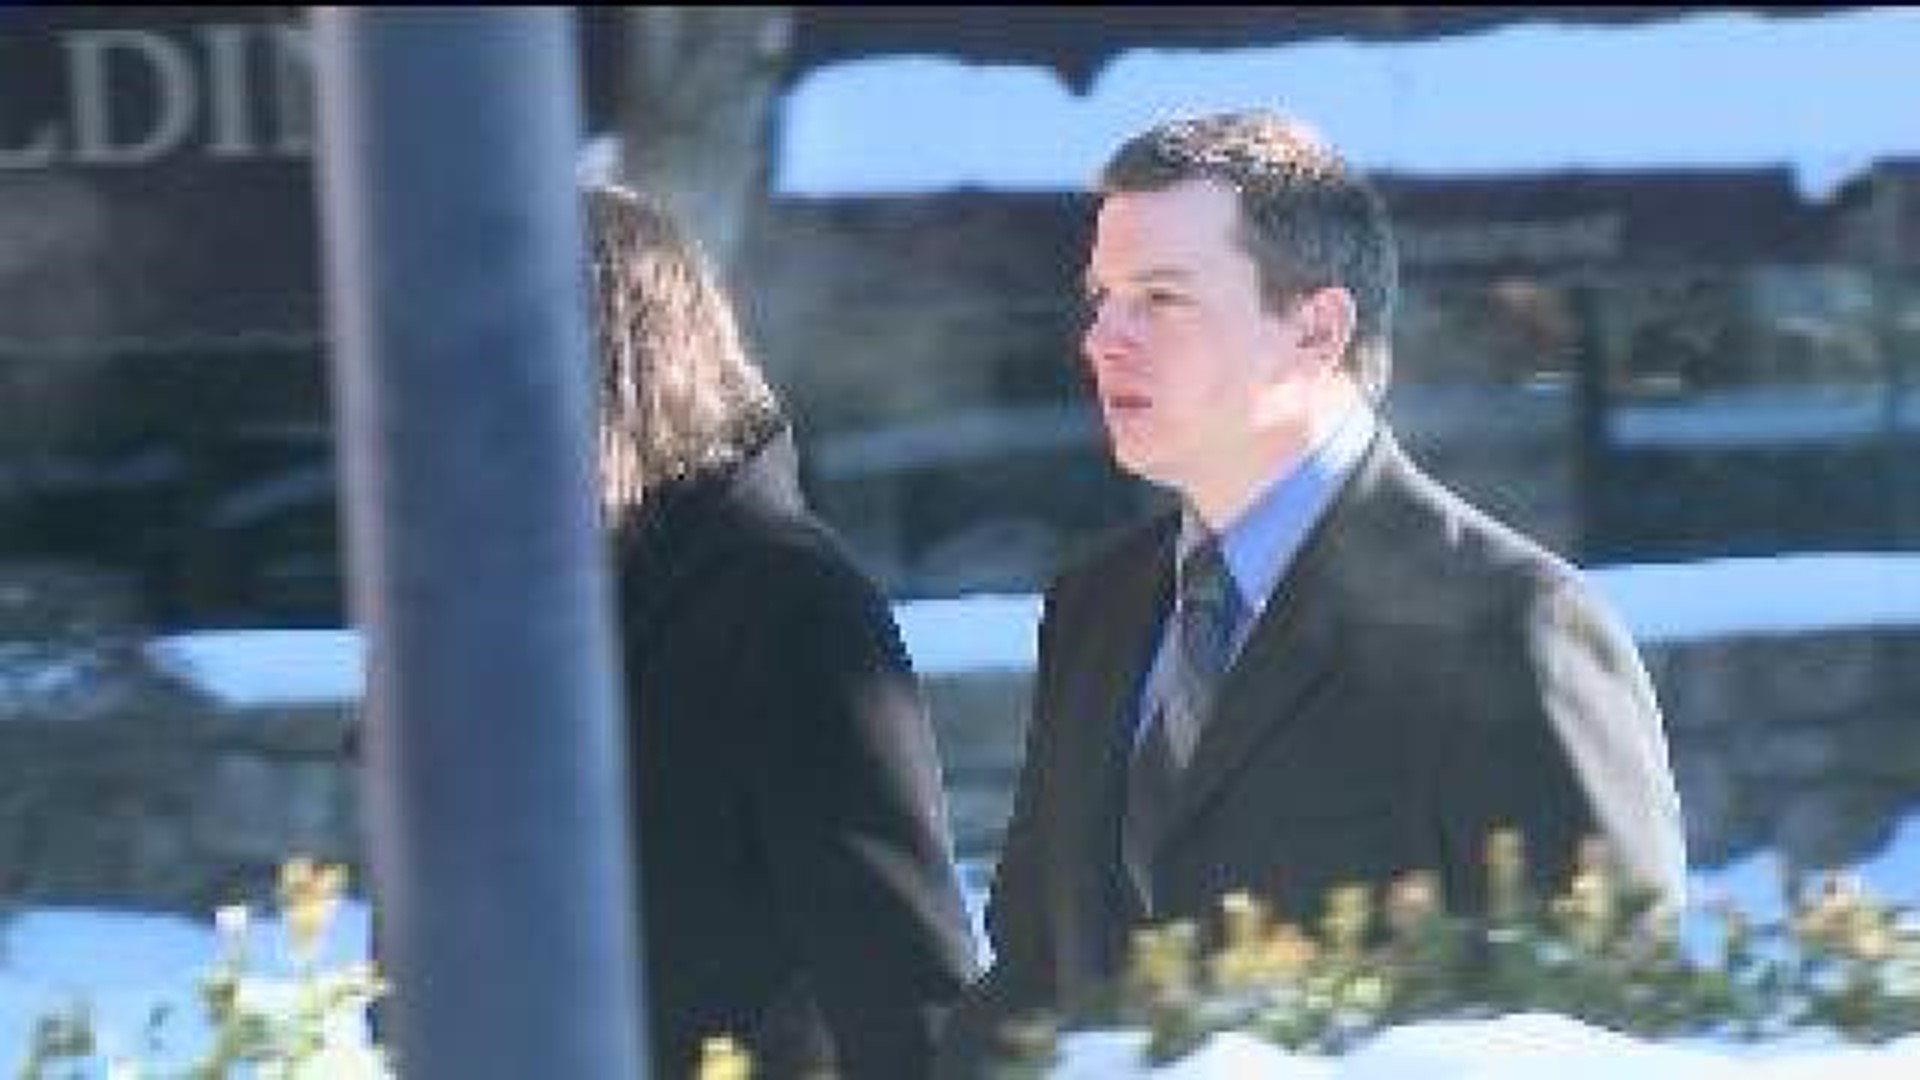 All Charges Against Williamsport Cop Held for Trial